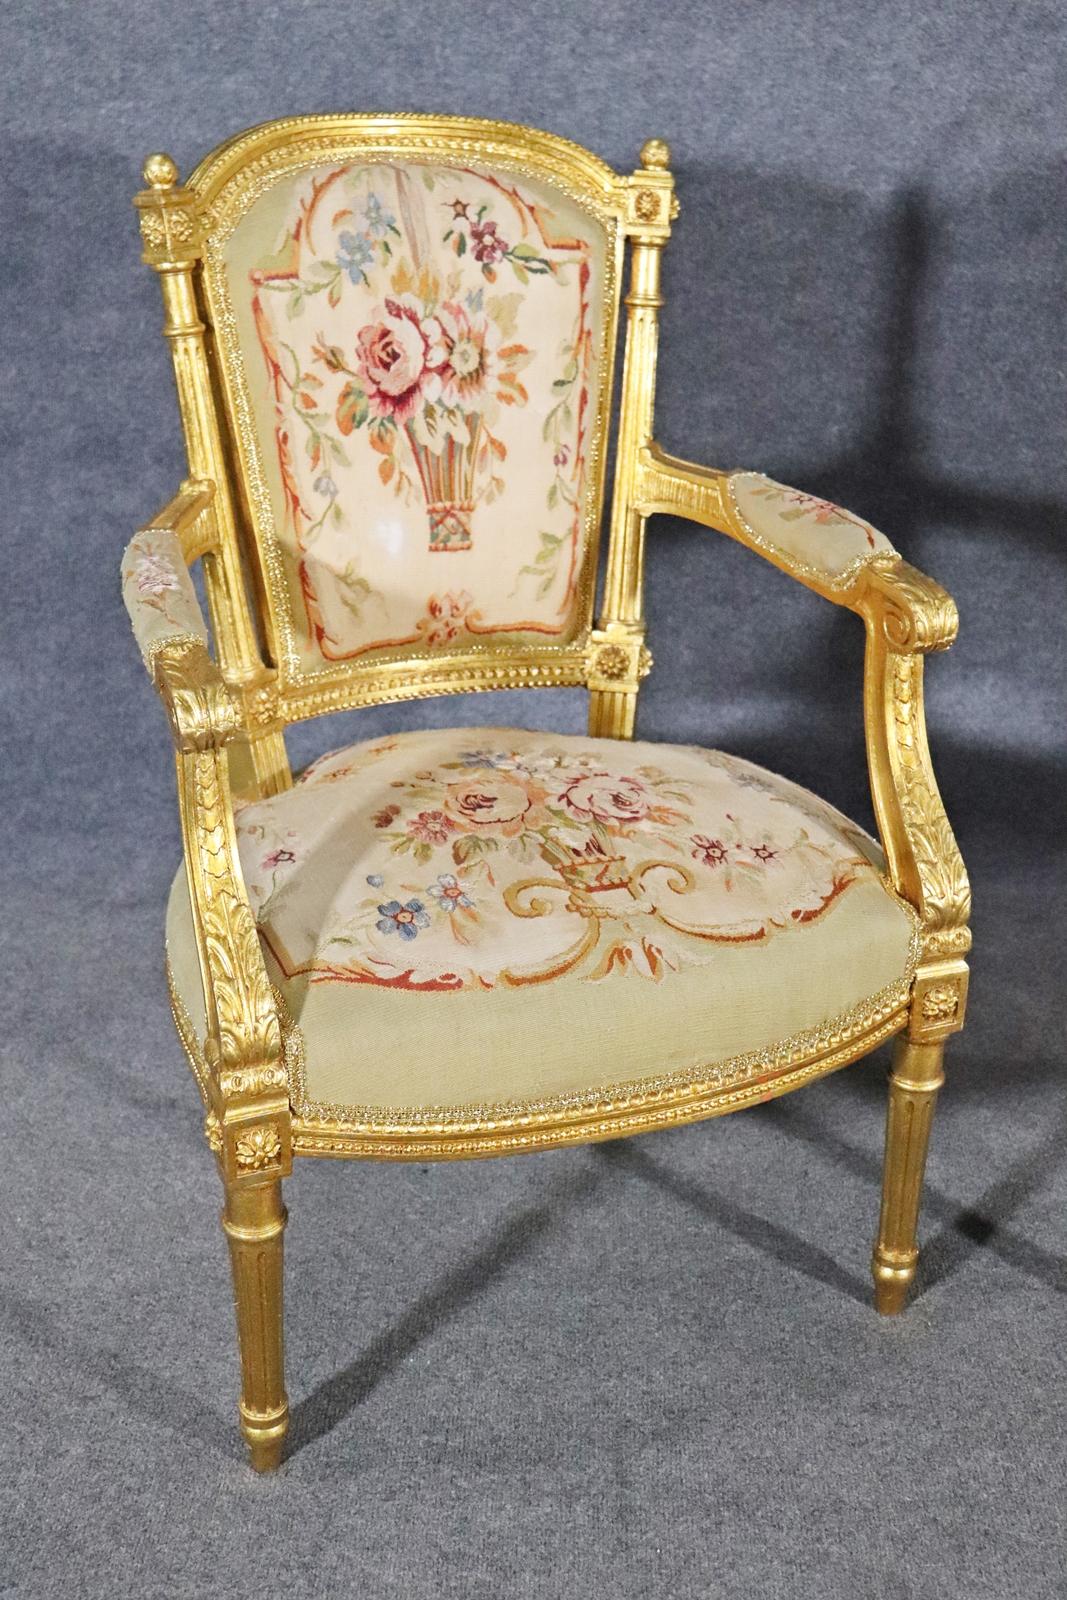 Early 20th Century Fine Pair Gilded French Louis XVI Aubusson Upholstered Fauteuils Armchairs